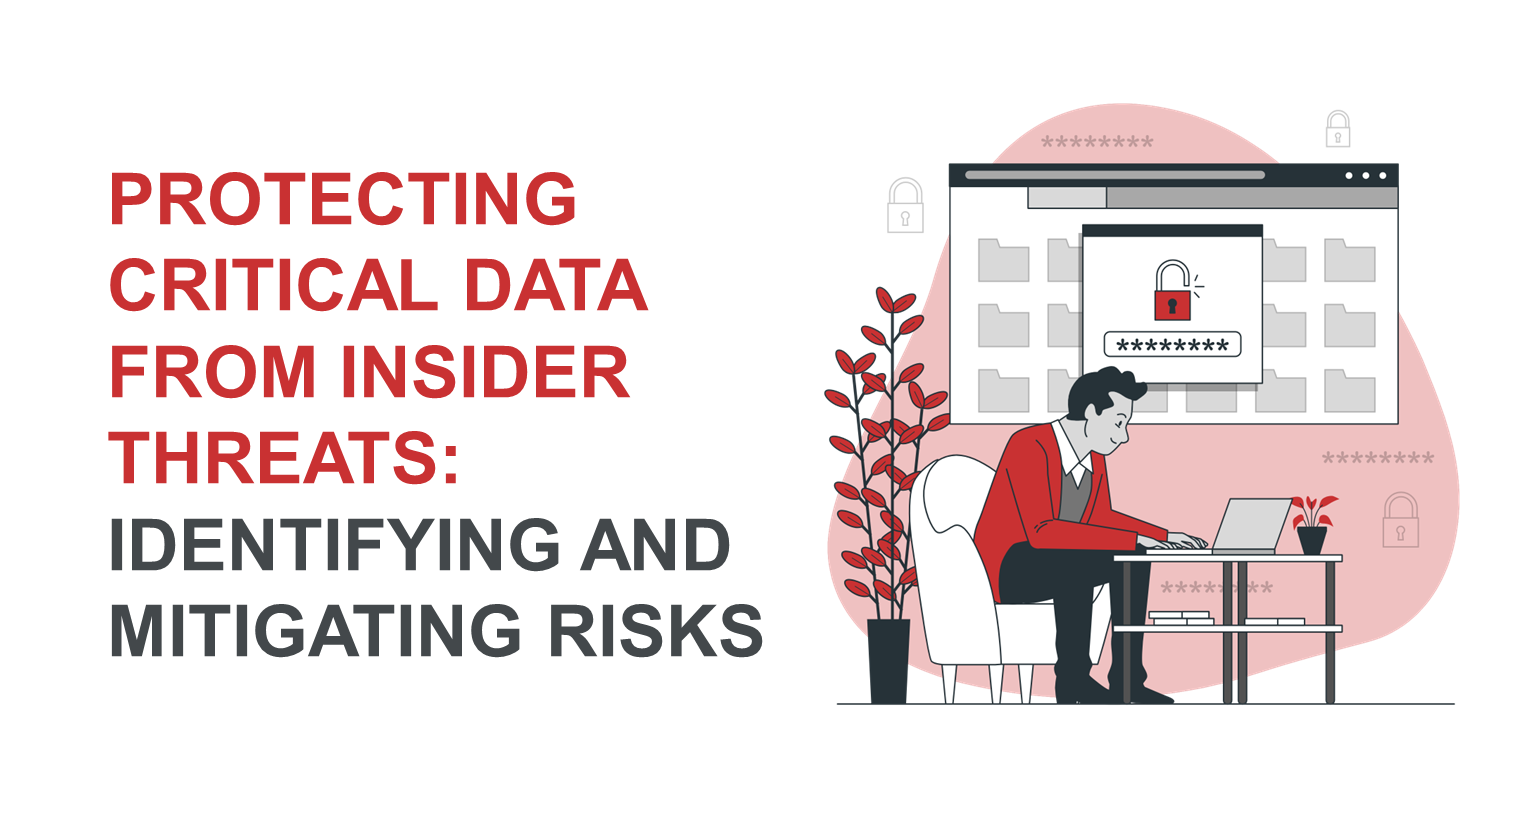 Protecting Critical Data from Insider Threats: Identifying and Mitigating Risks